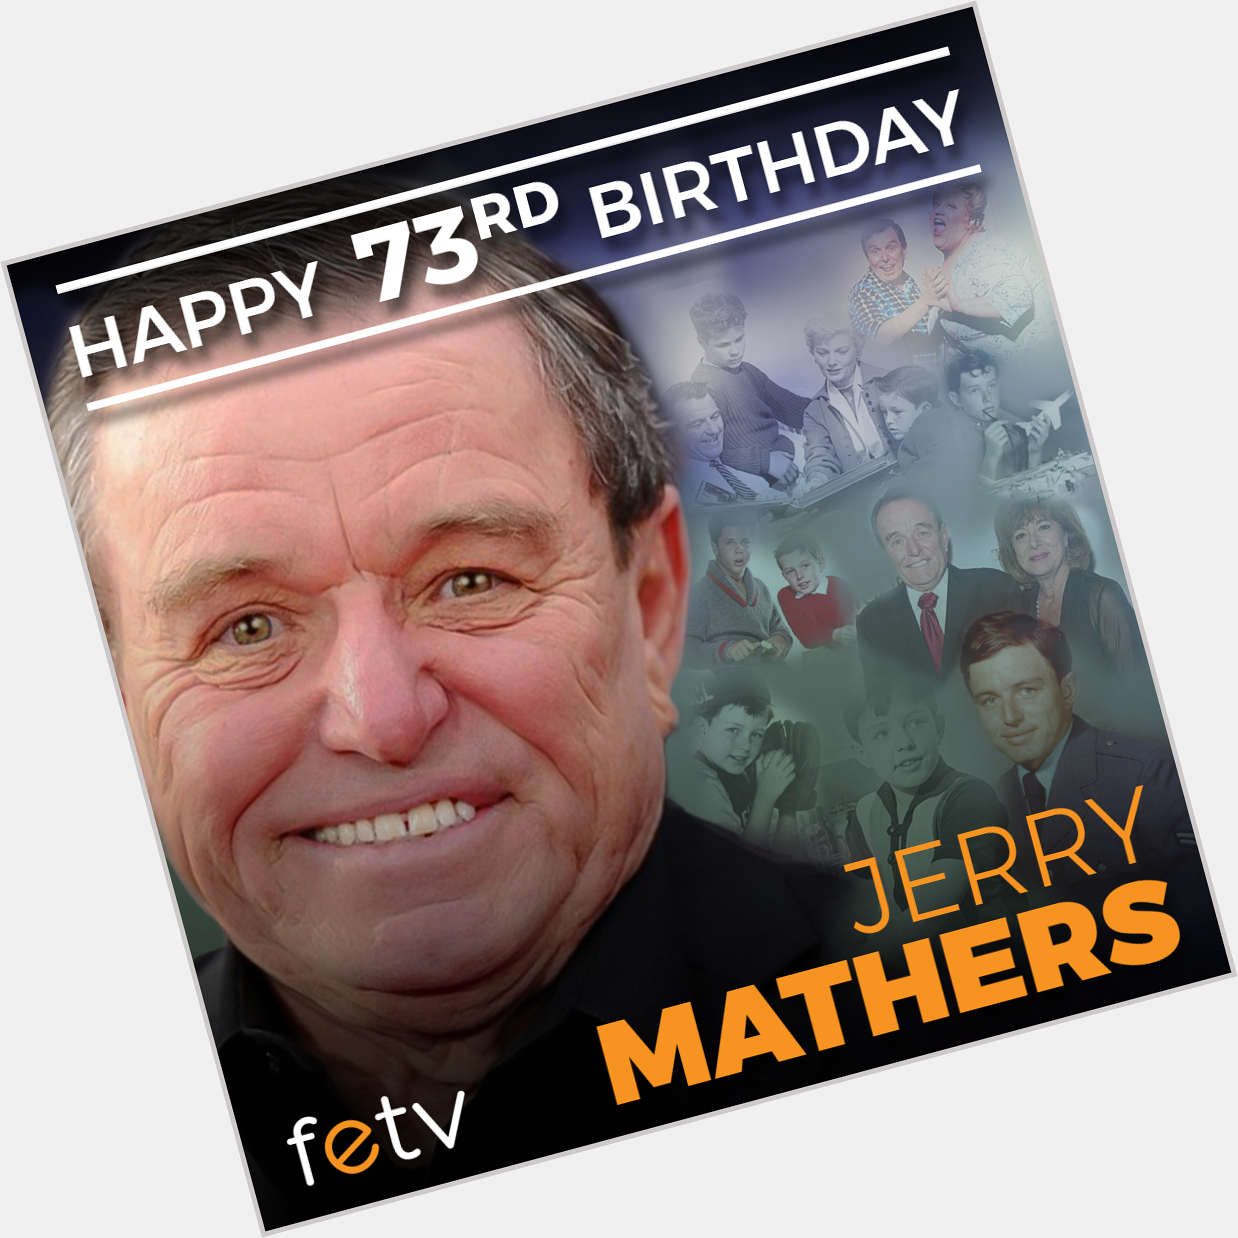 Happy Birthday to Jerry Mathers! The star turns 73 today.   